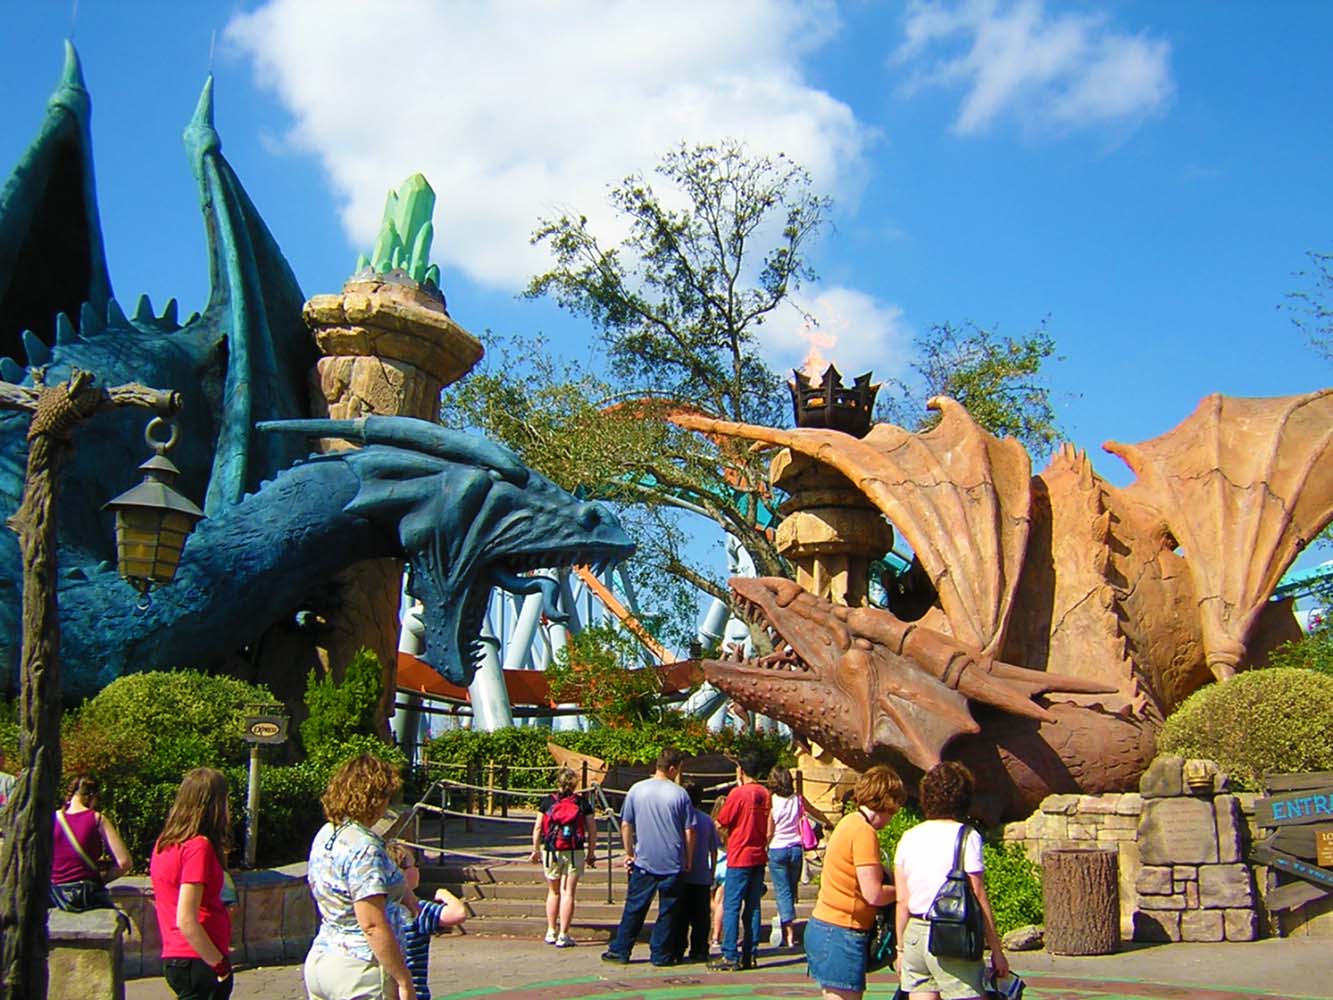 Universal Studios Florida’s: Dueling Dragons and Poseidon’s Fury Ride entrance featuring a blue dragon and a red dragon